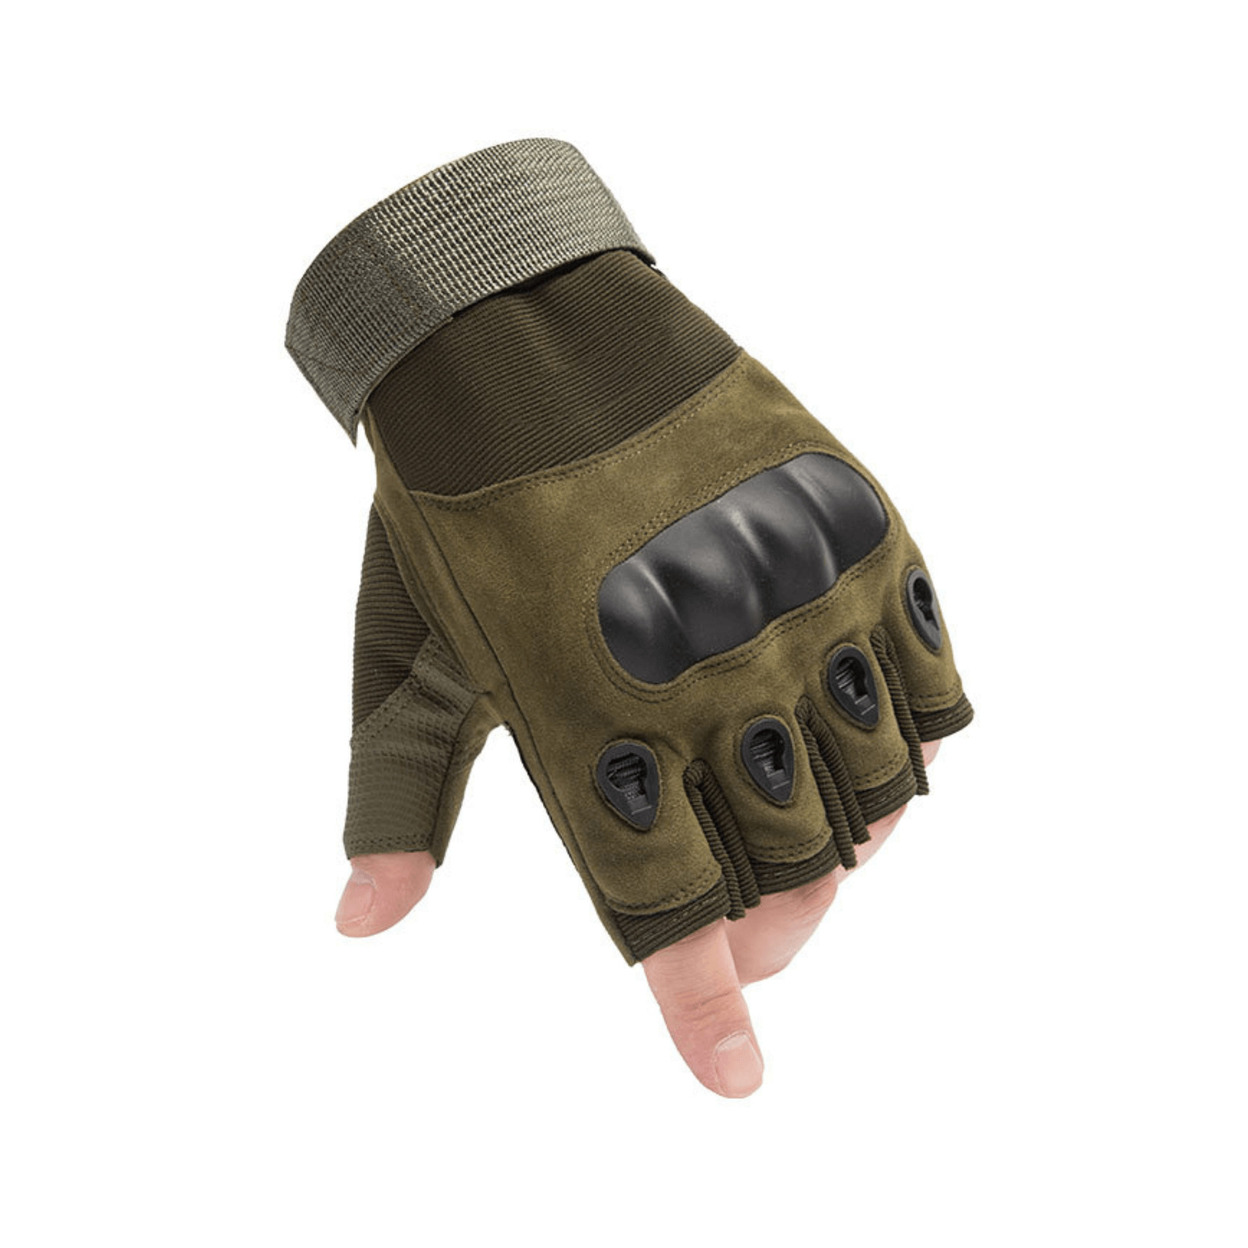 Tactical Fingerless Airsoft Gloves For Outdoor Sports, Paintball, And Motorcycling - Green, Medium